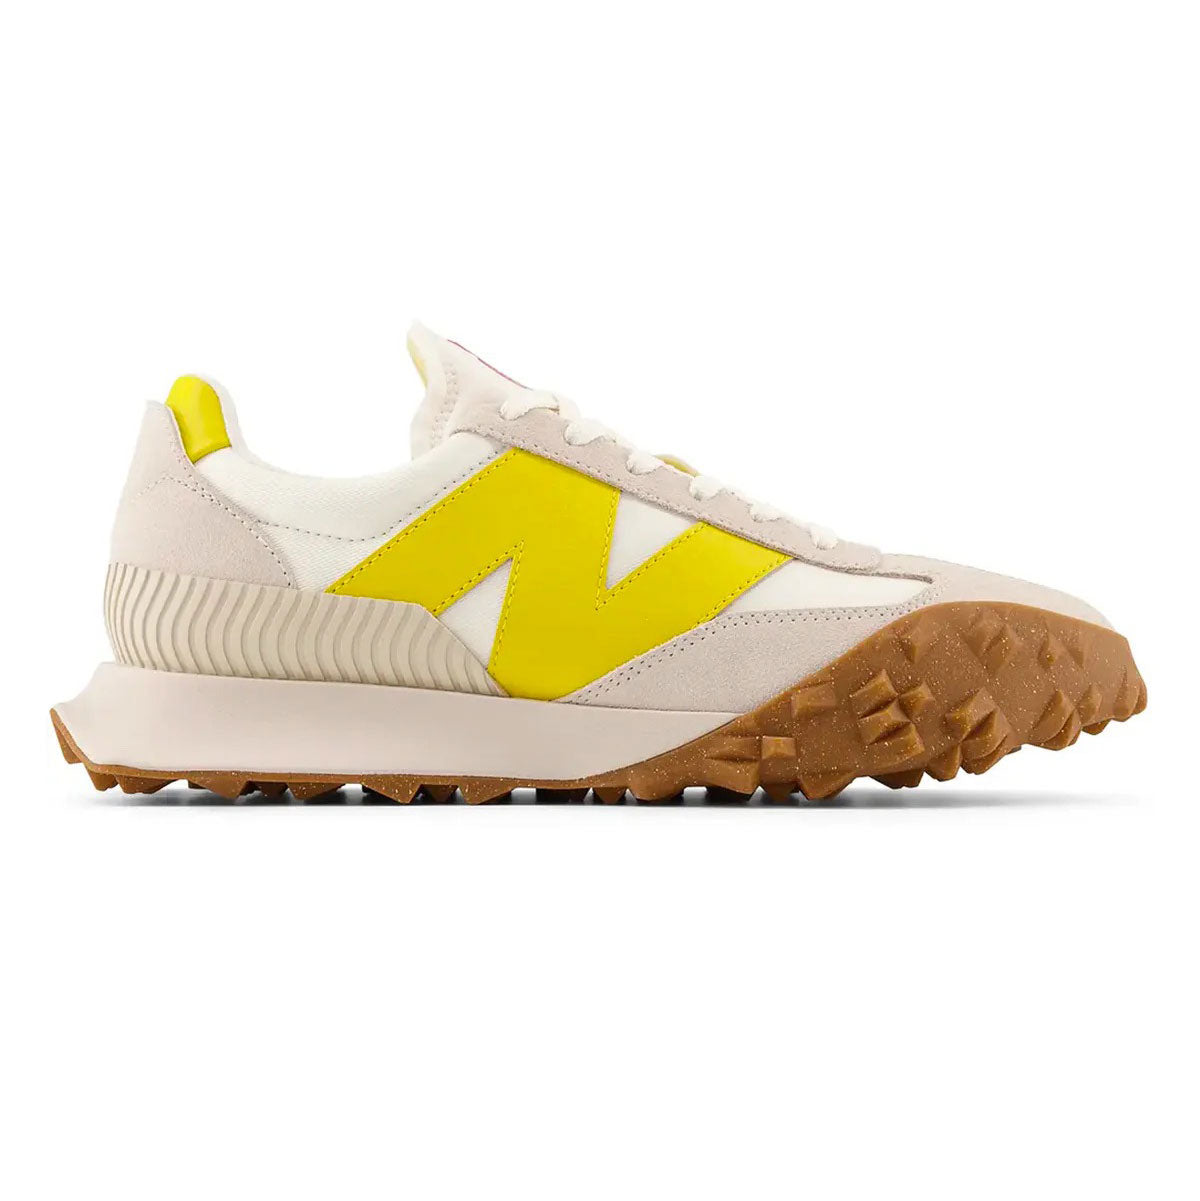 New Balance XC-72 Gray Yellow New Men's 70s Retro Style Sneakers Running Shoes Side View UXC72VC